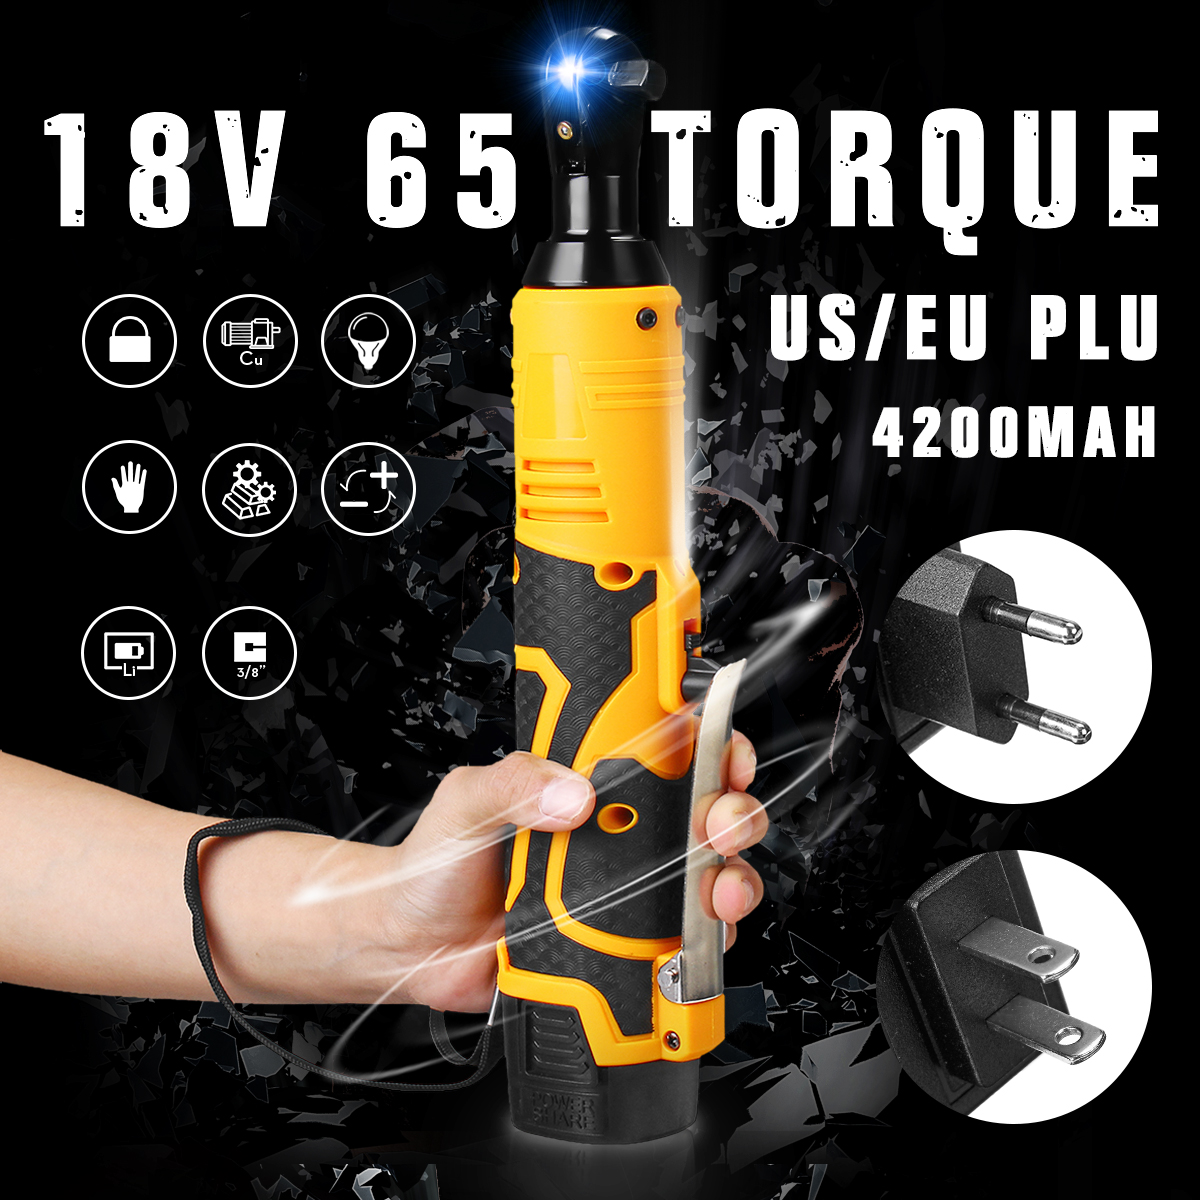 18V-Power-Cordless-Ratchet-Wrench-Li-ion-Electric-Wrench-4200mah-Max-Torque-65-Compact-Size-Battery--1560568-2